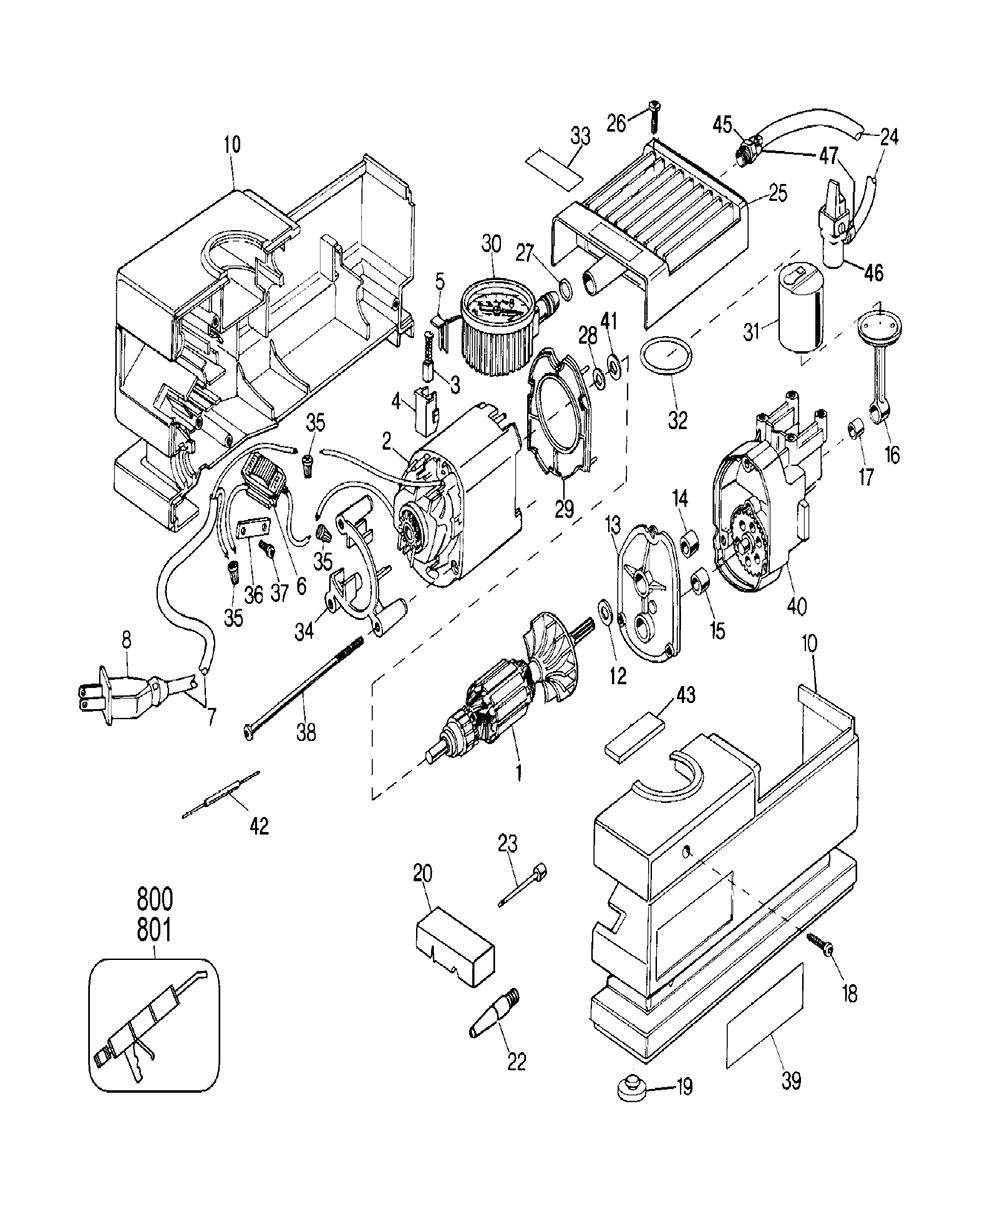 Black and Decker 7391 Parts List and Diagram - Type 4